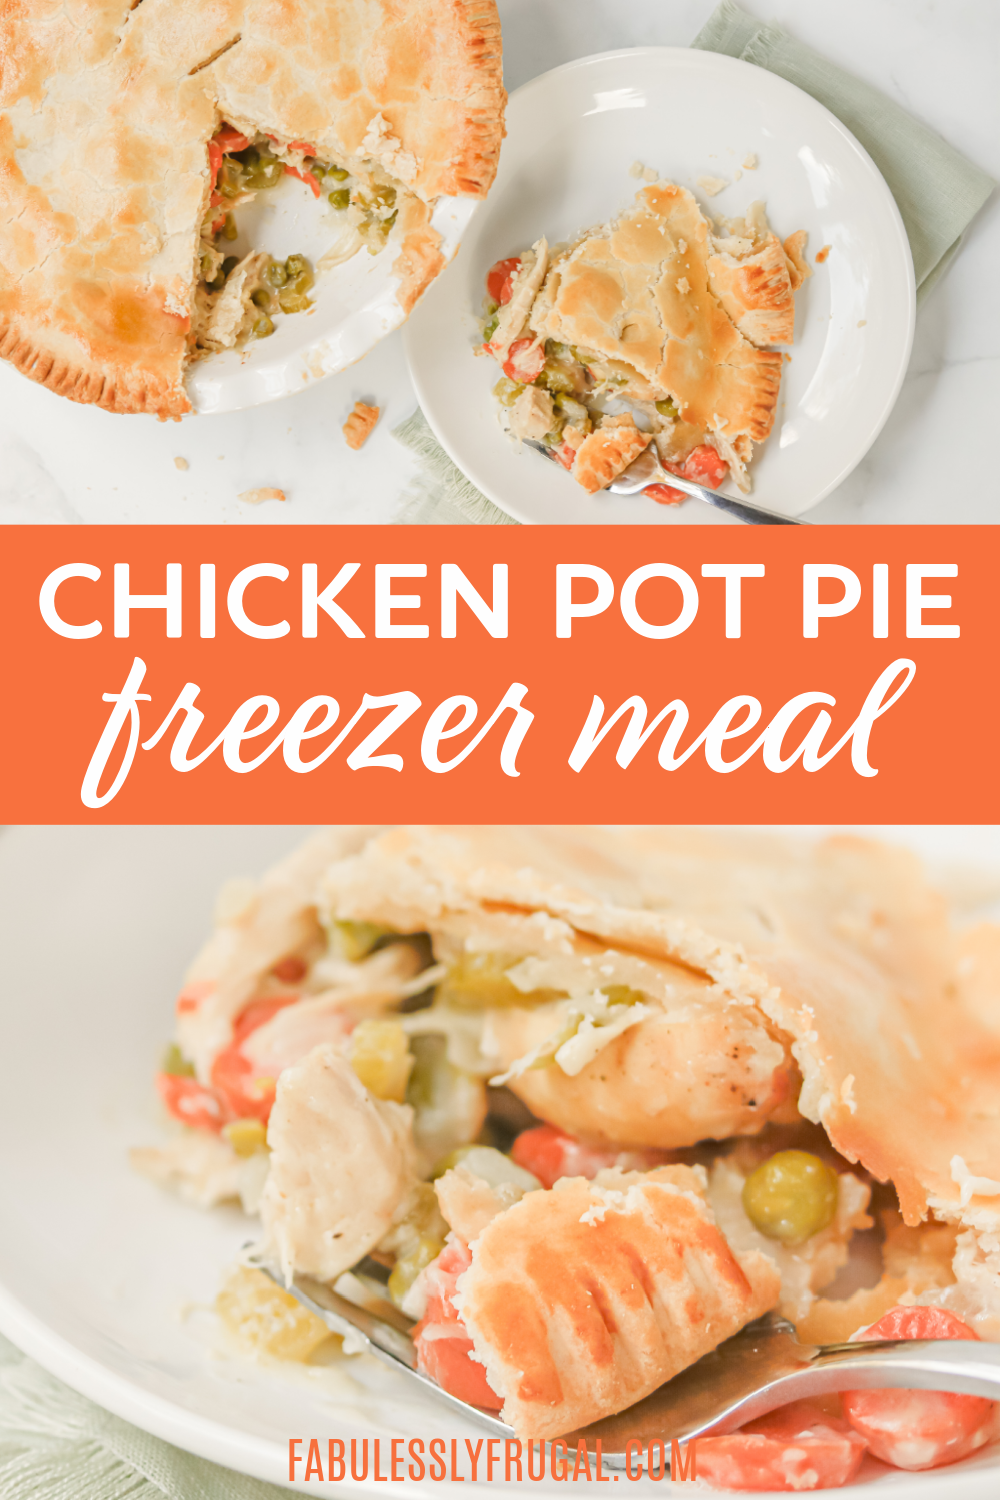 https://fabulesslyfrugal.com/wp-content/uploads/2021/06/chicken-pot-pie-freezer-meal-pin-1.png